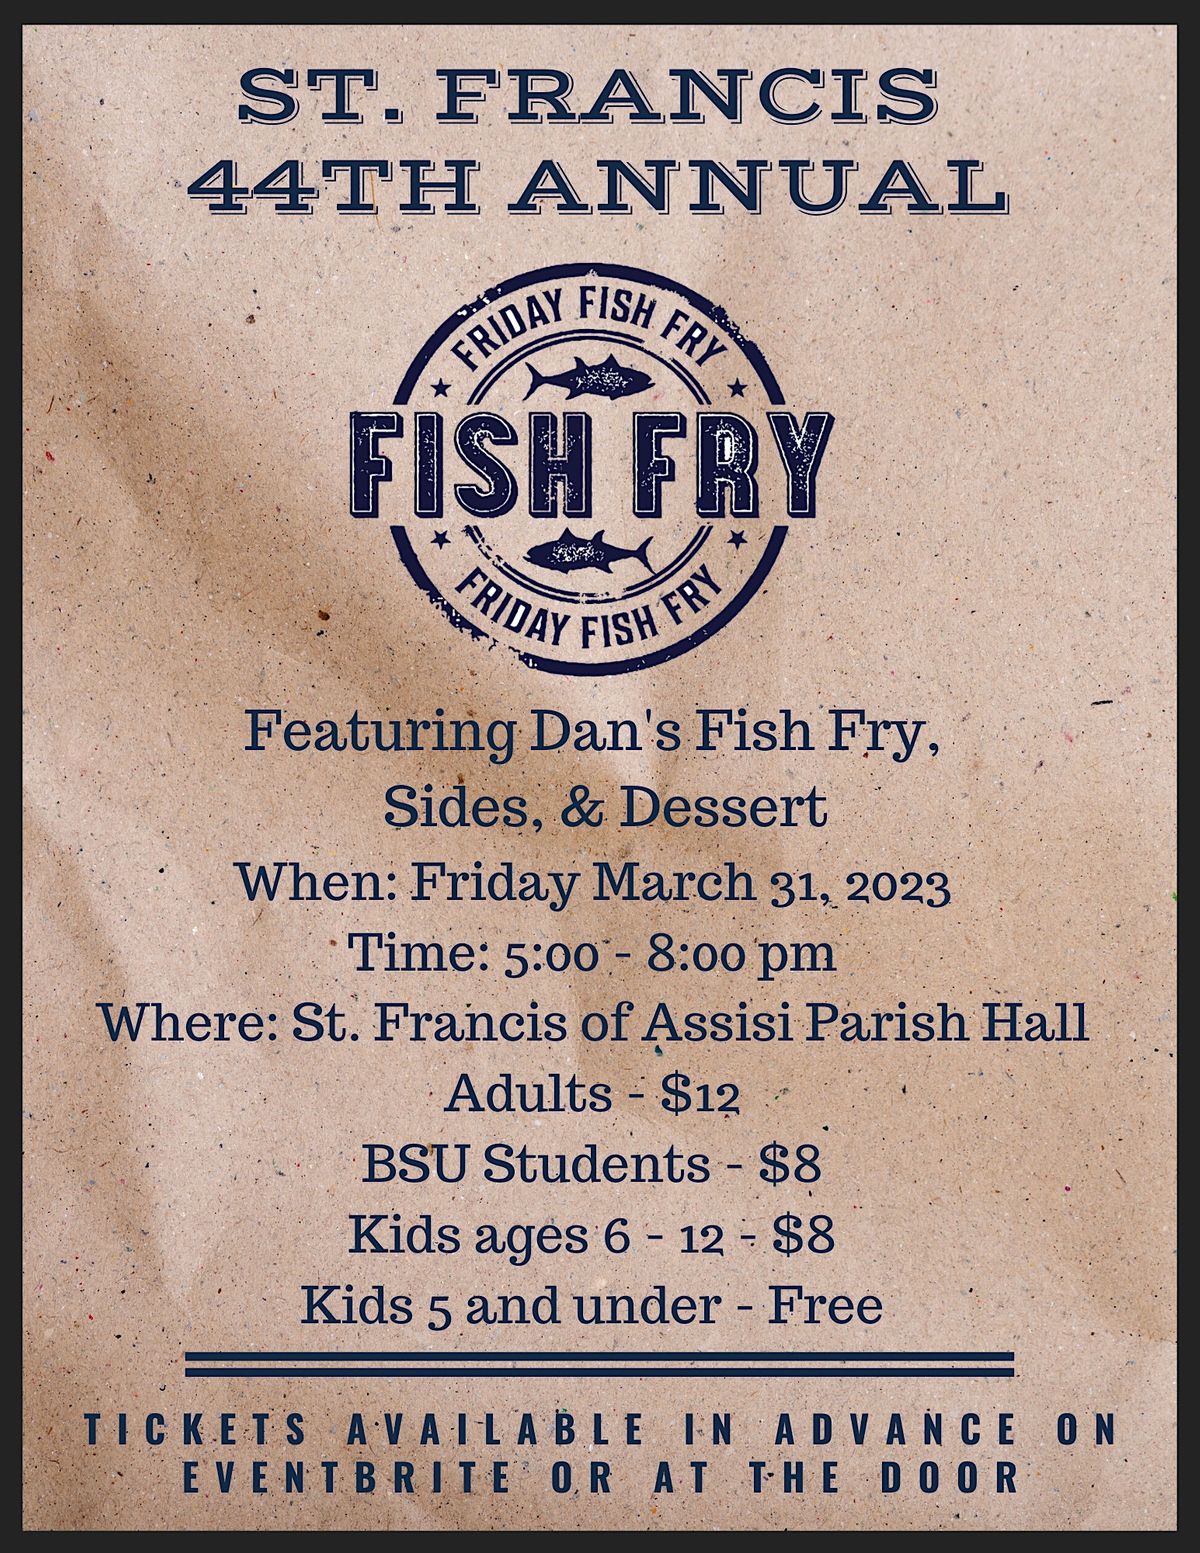 St. Francis of Assisi Fish Fry Featuring Dans Fish Fry 1200 W